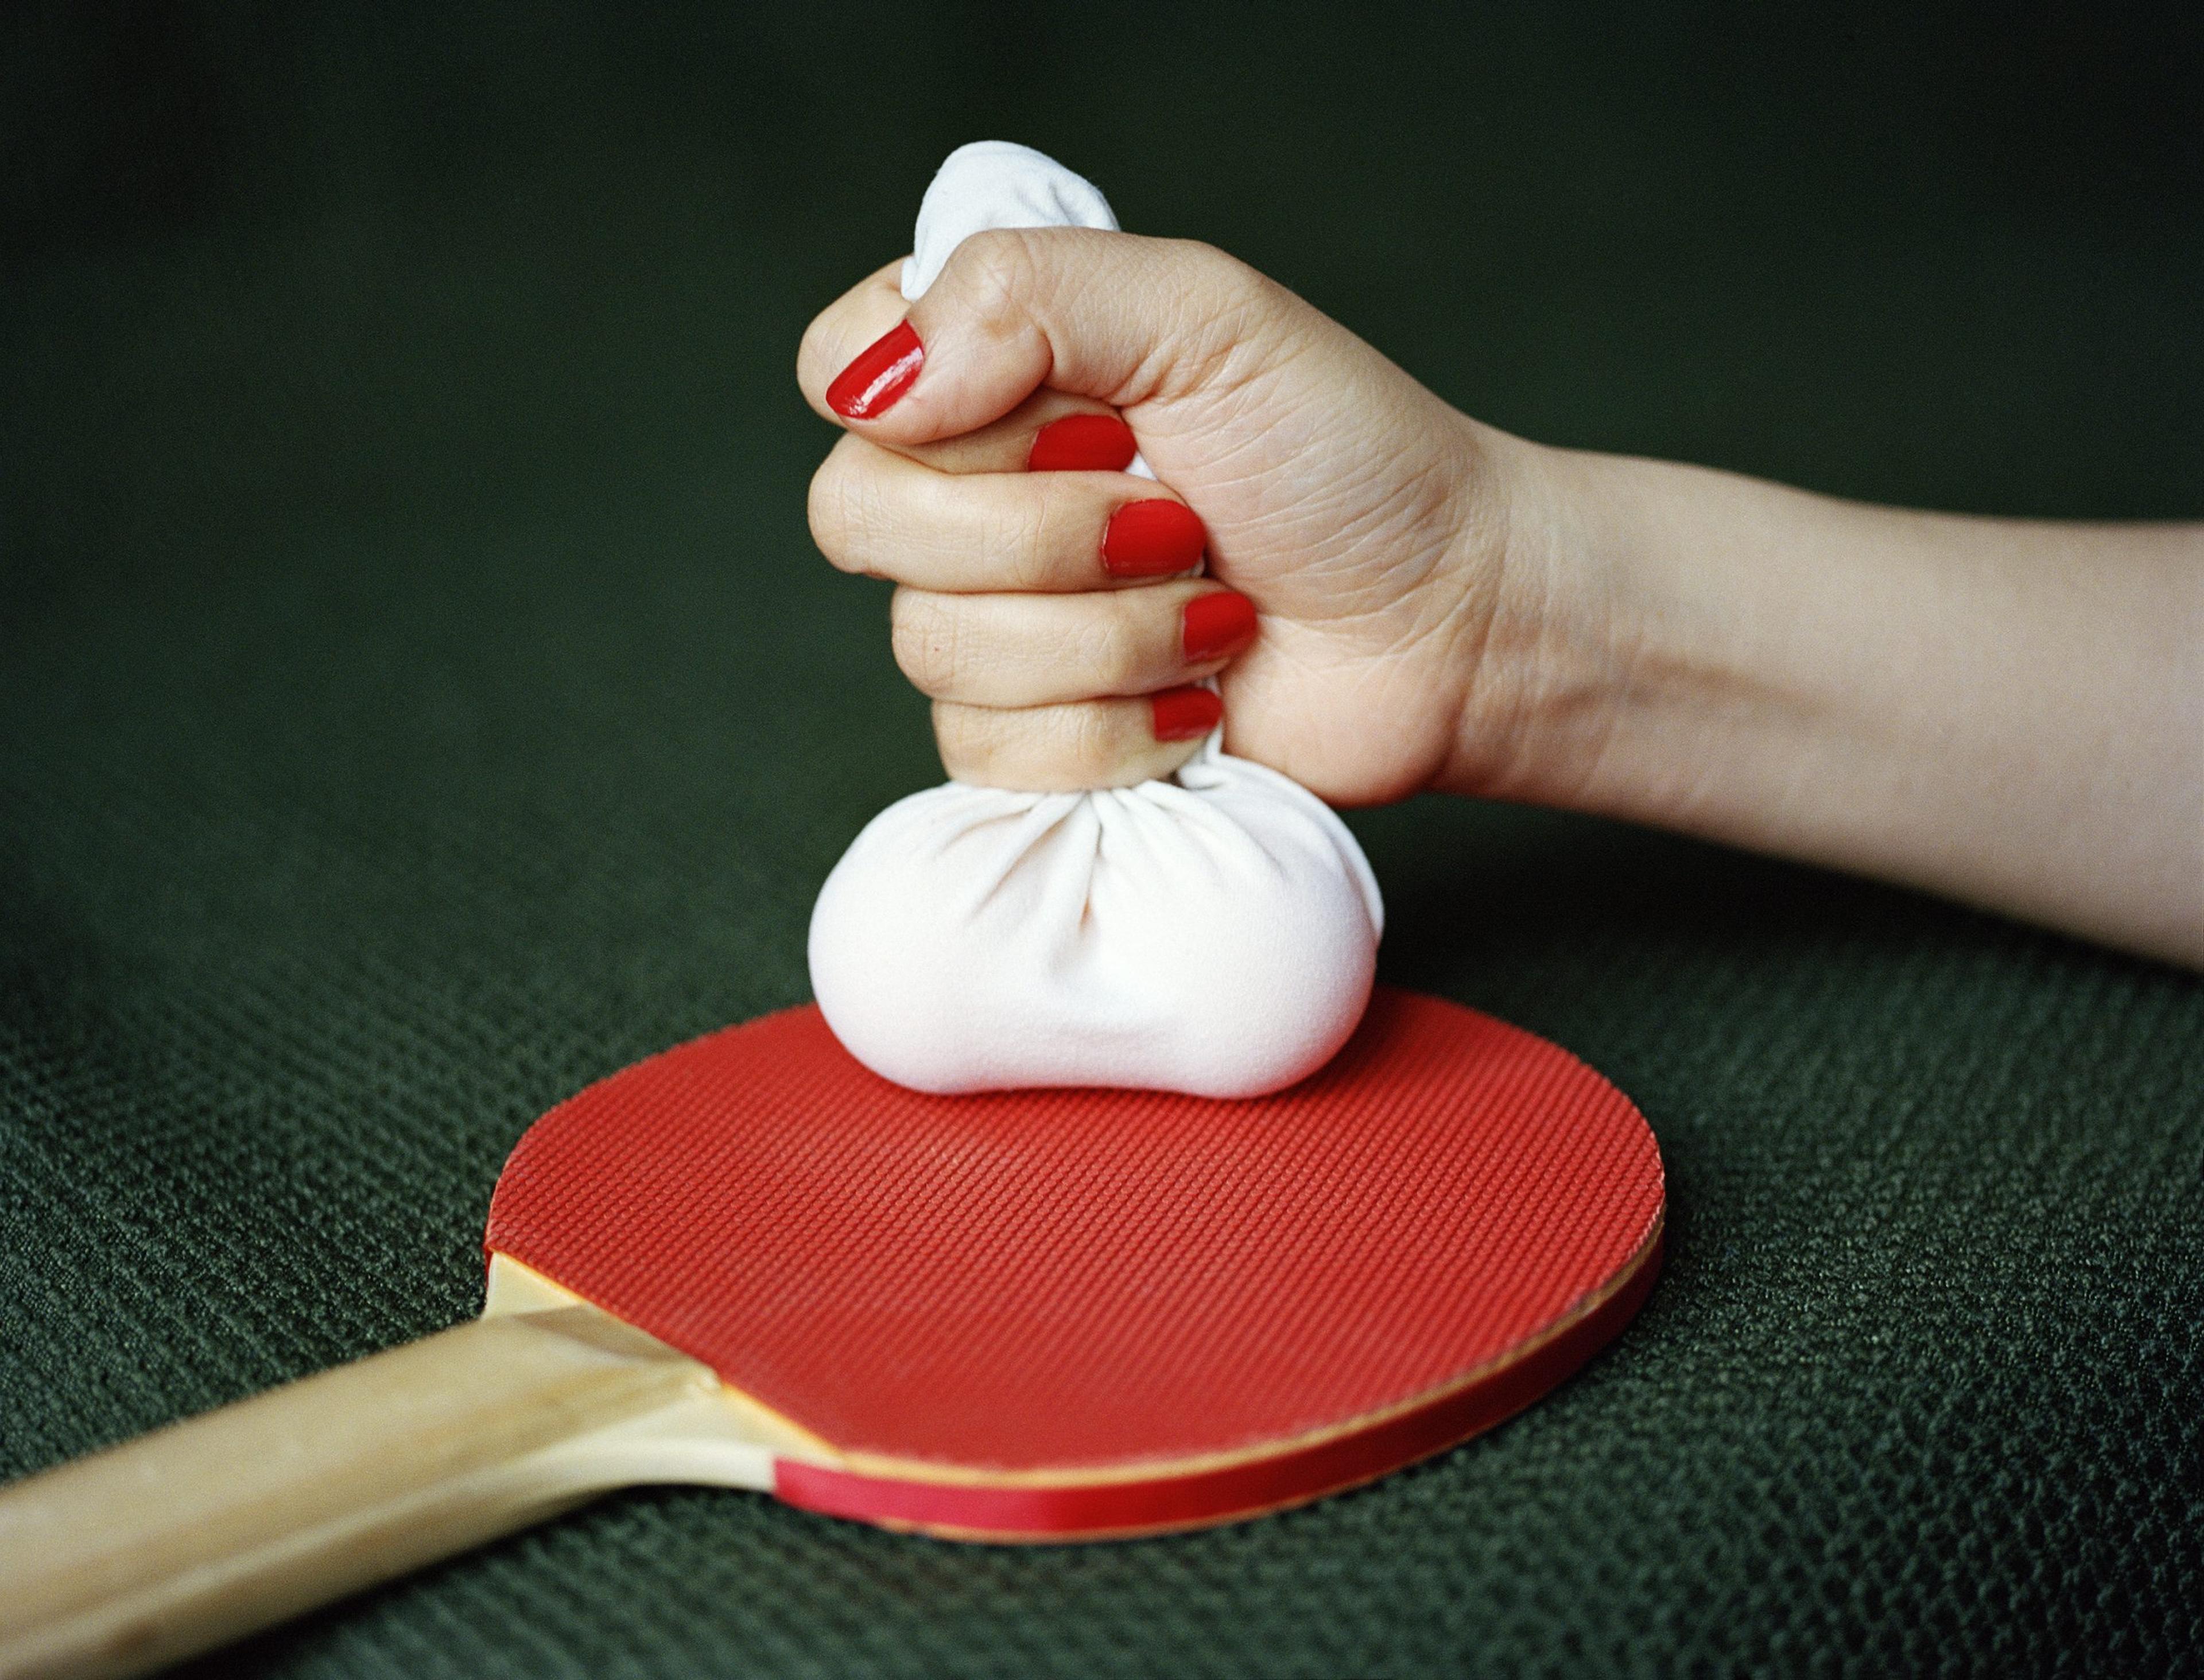 A photograph of a woman's hand holding a phallic object on top of a red ping-pong paddle